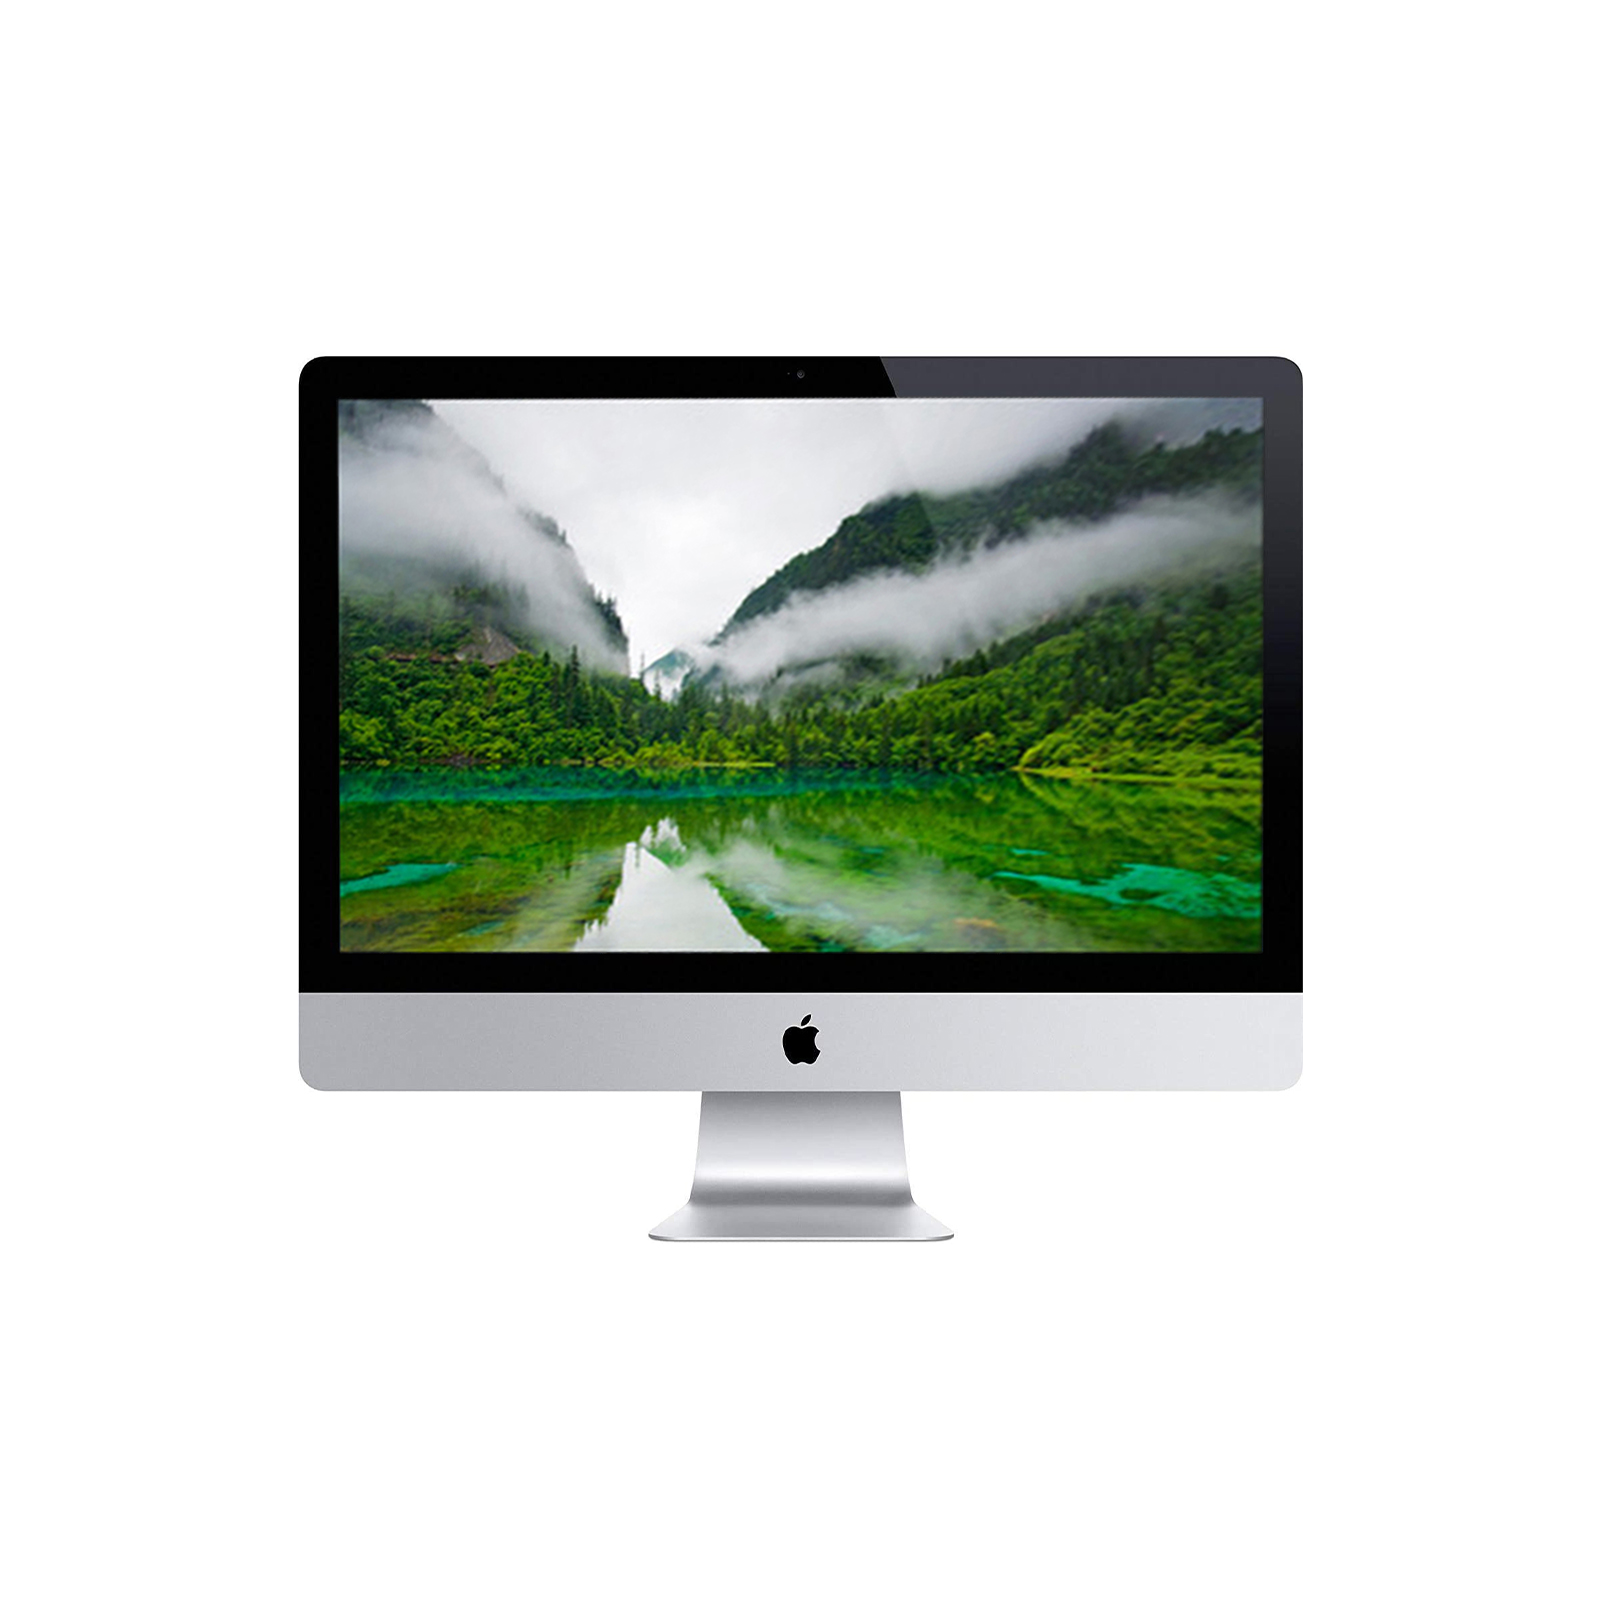 iMac 21.5" Late 2013 - Excellent / Very Good / Good Condition